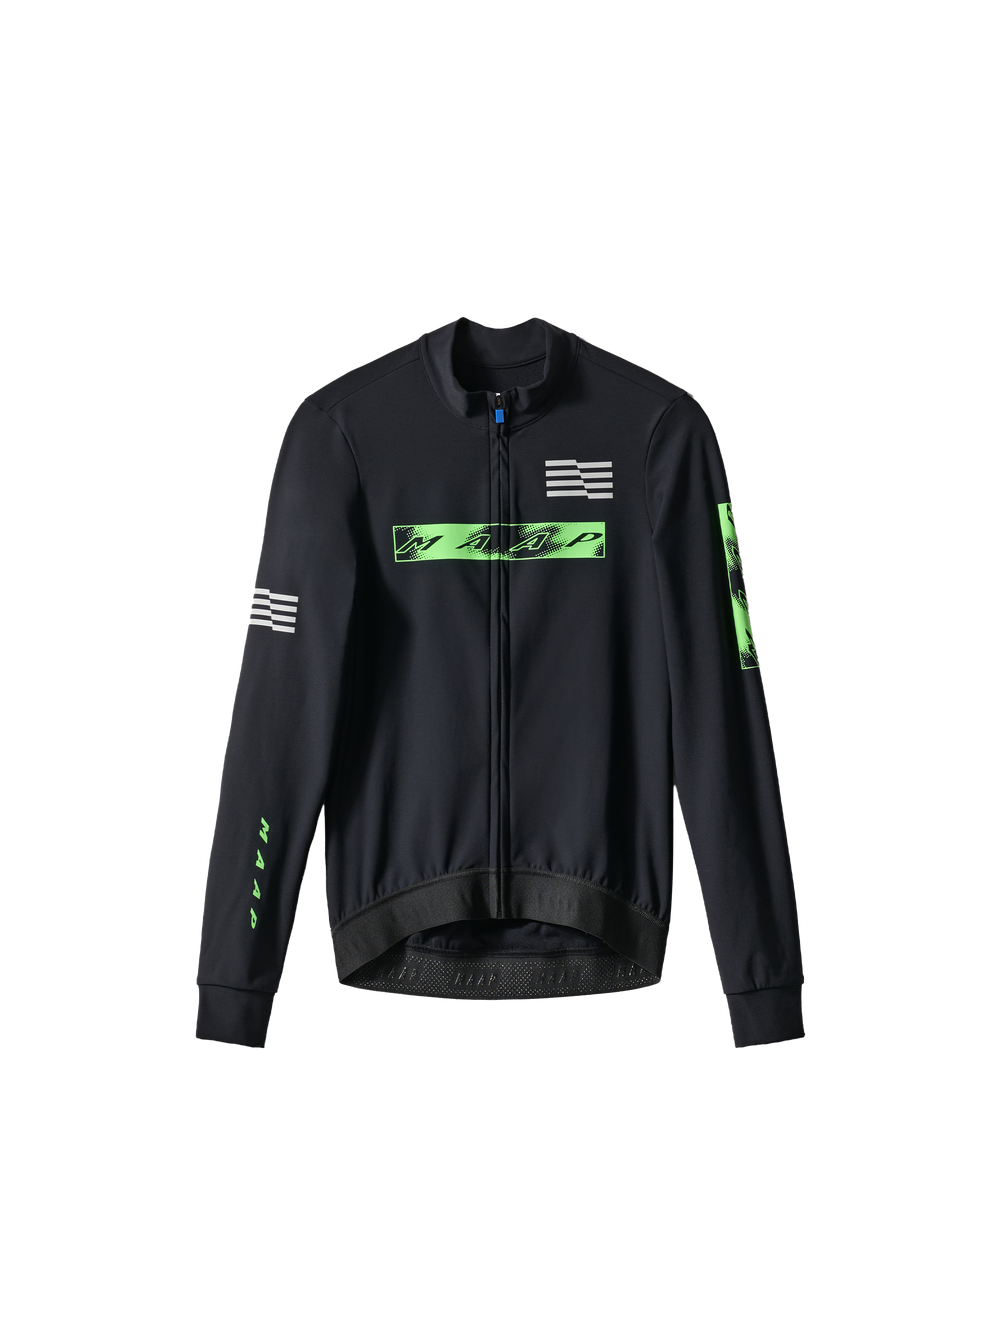 Product Image for Women's LPW Thermal LS Jersey